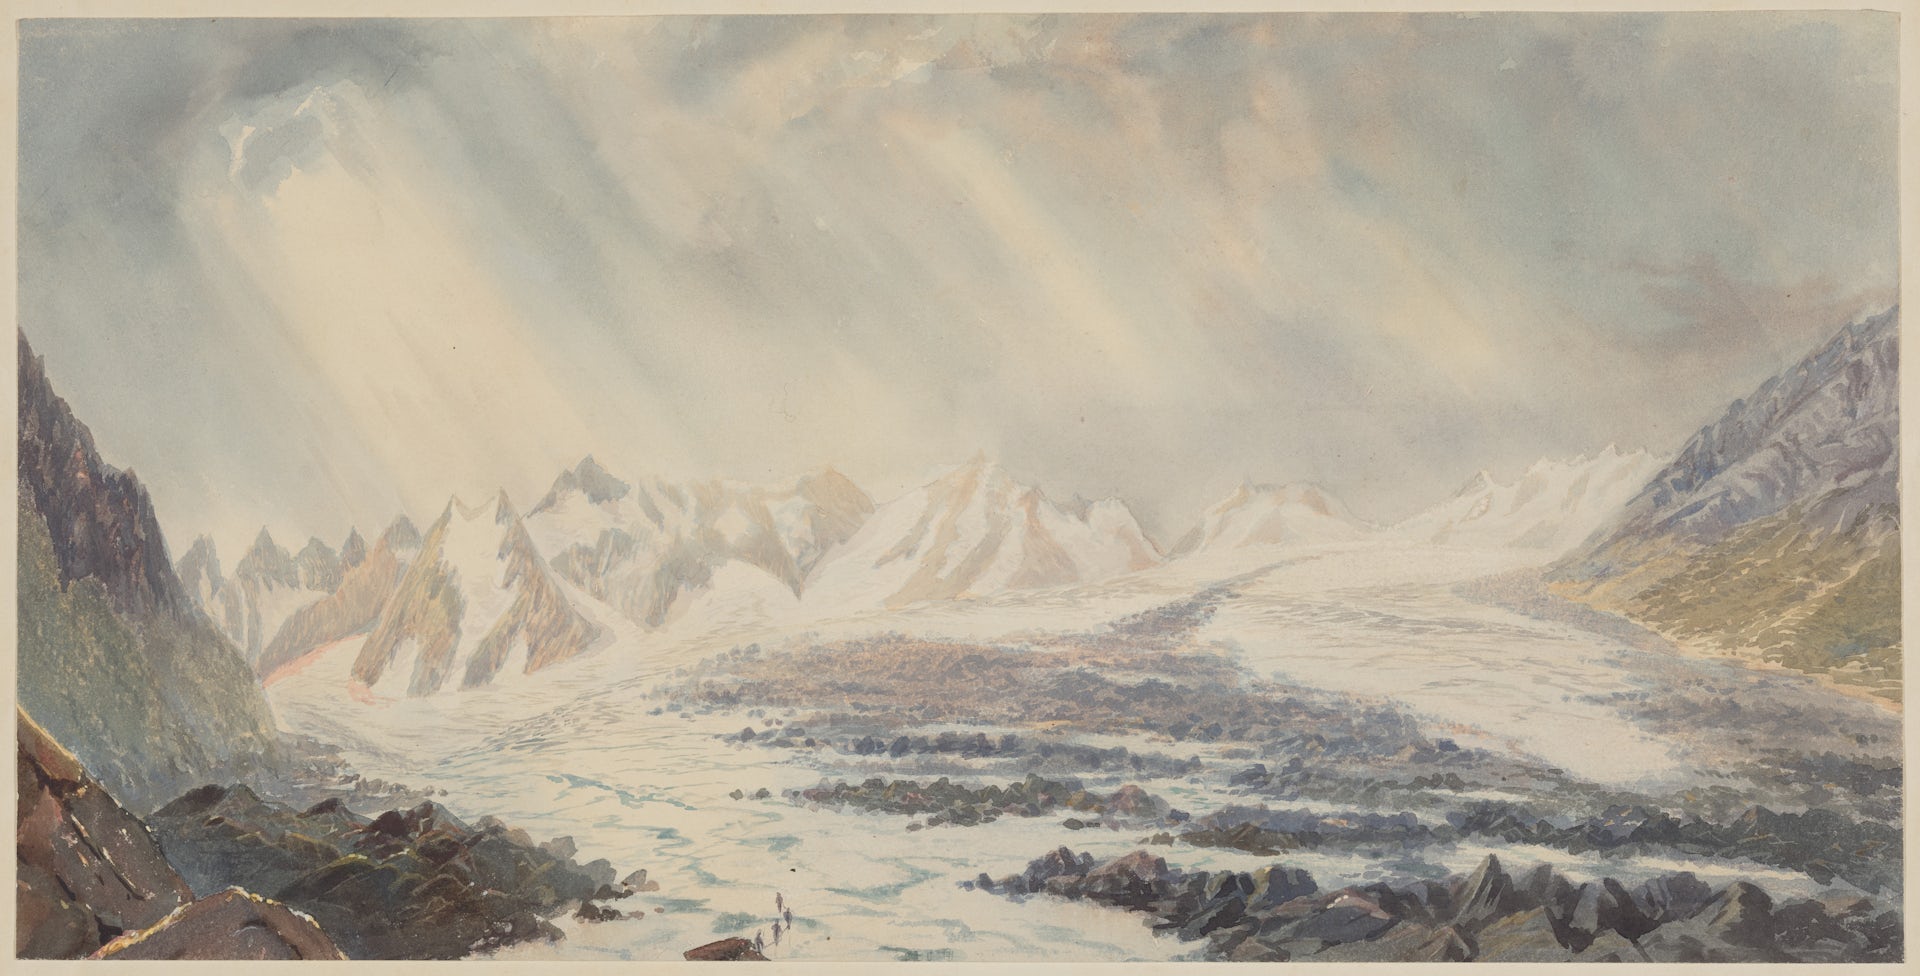 Impending Extinction: New Photographs and Old Paintings Depict the Frozen State of NZ Glaciers